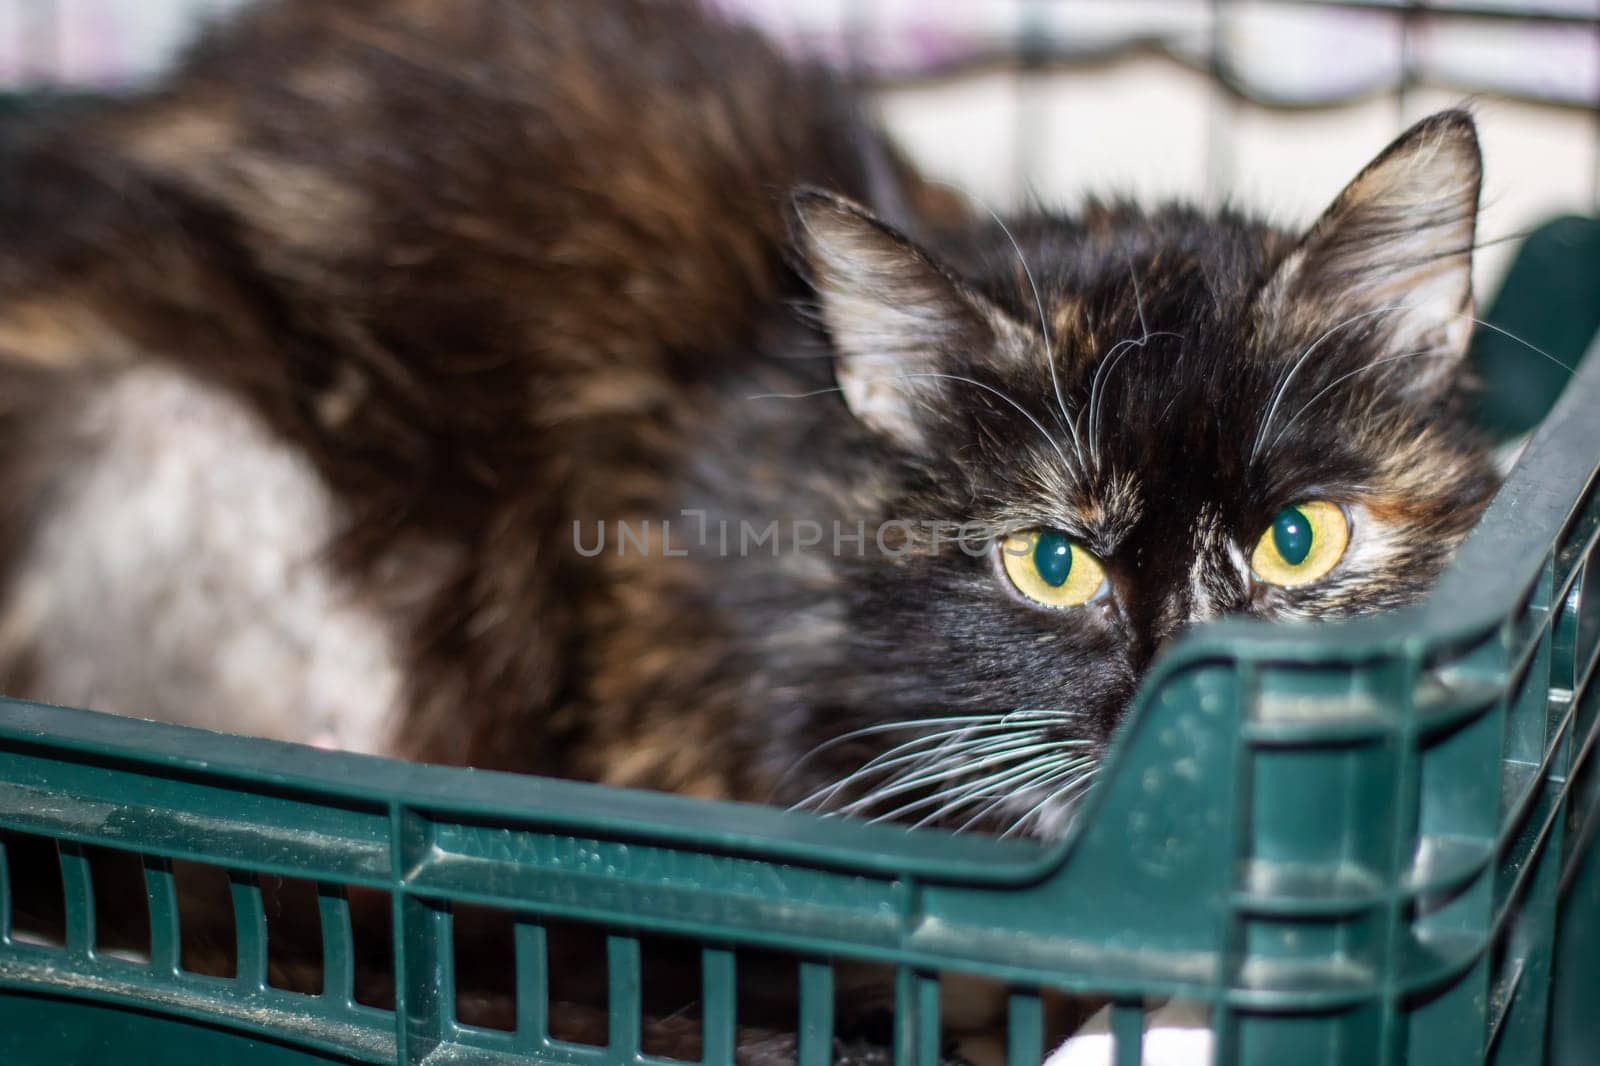 A Cat with emerald eyes rests in a lush green crate by Vera1703